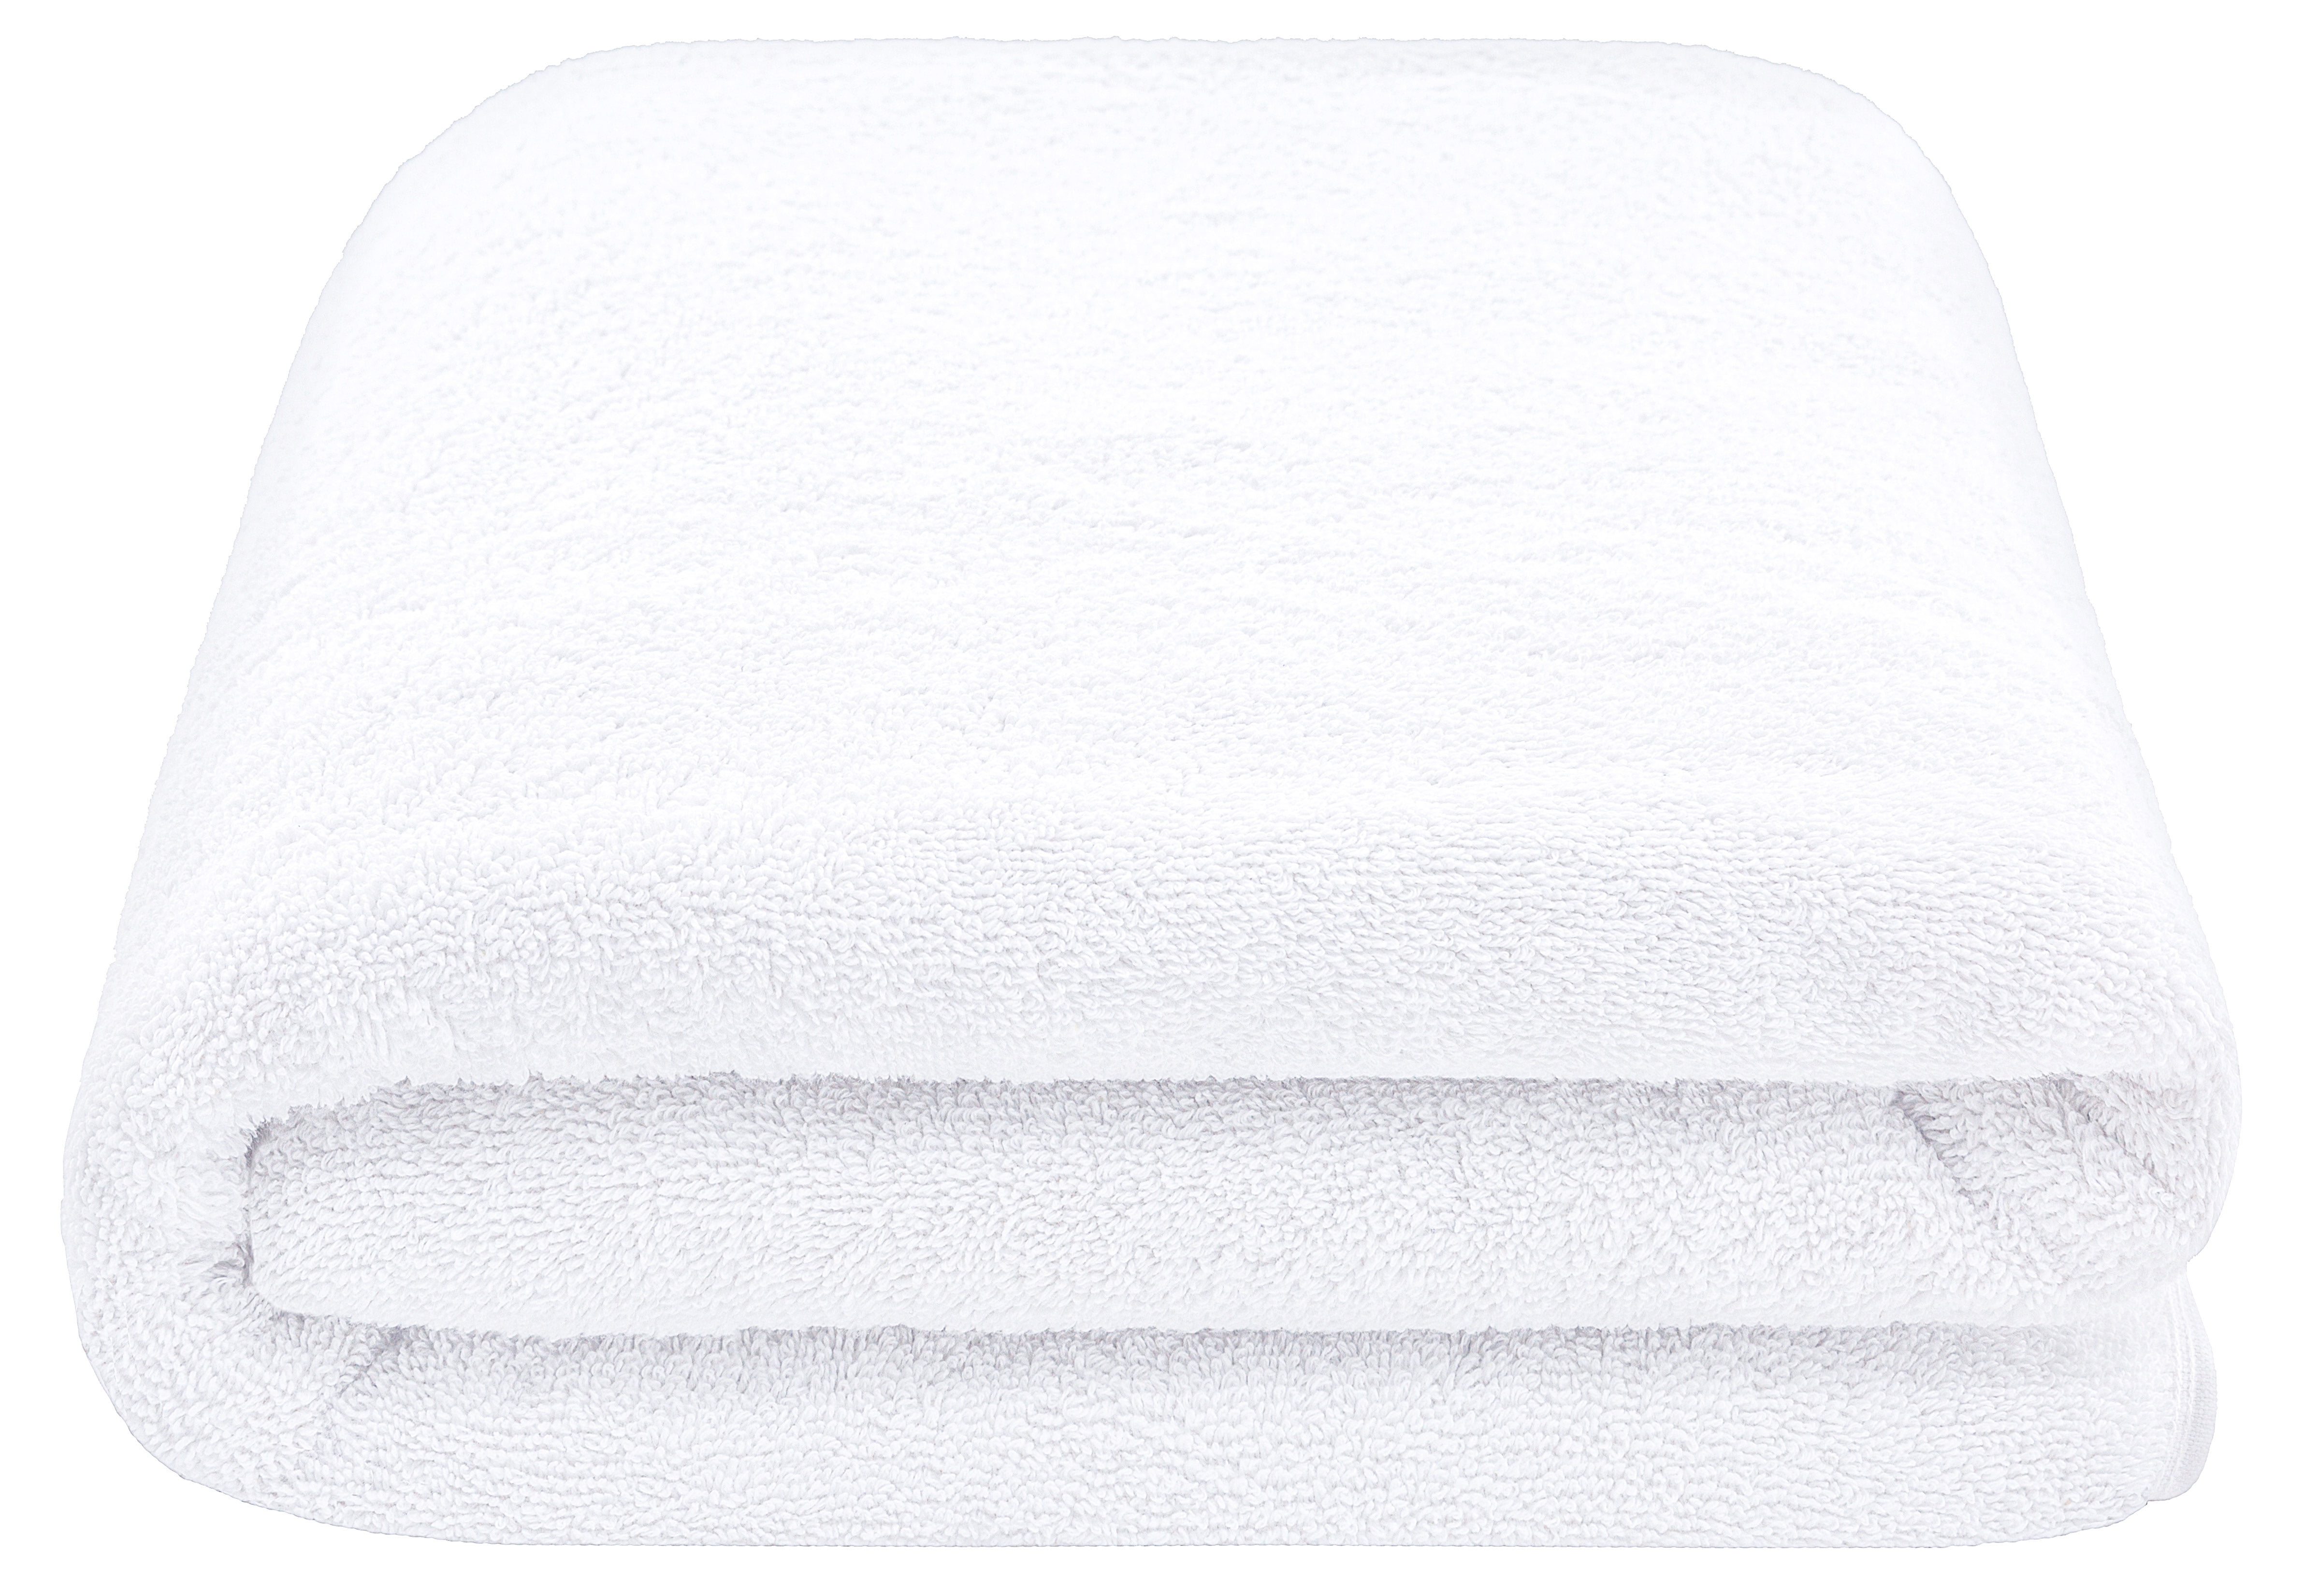 HVMS Oversized Bath Towels Extra Large 40x80 Inches Bath Sheets for Adults  Super Soft Quick Dry Highly Absobent Microfiber Shower Towels (2 Piece